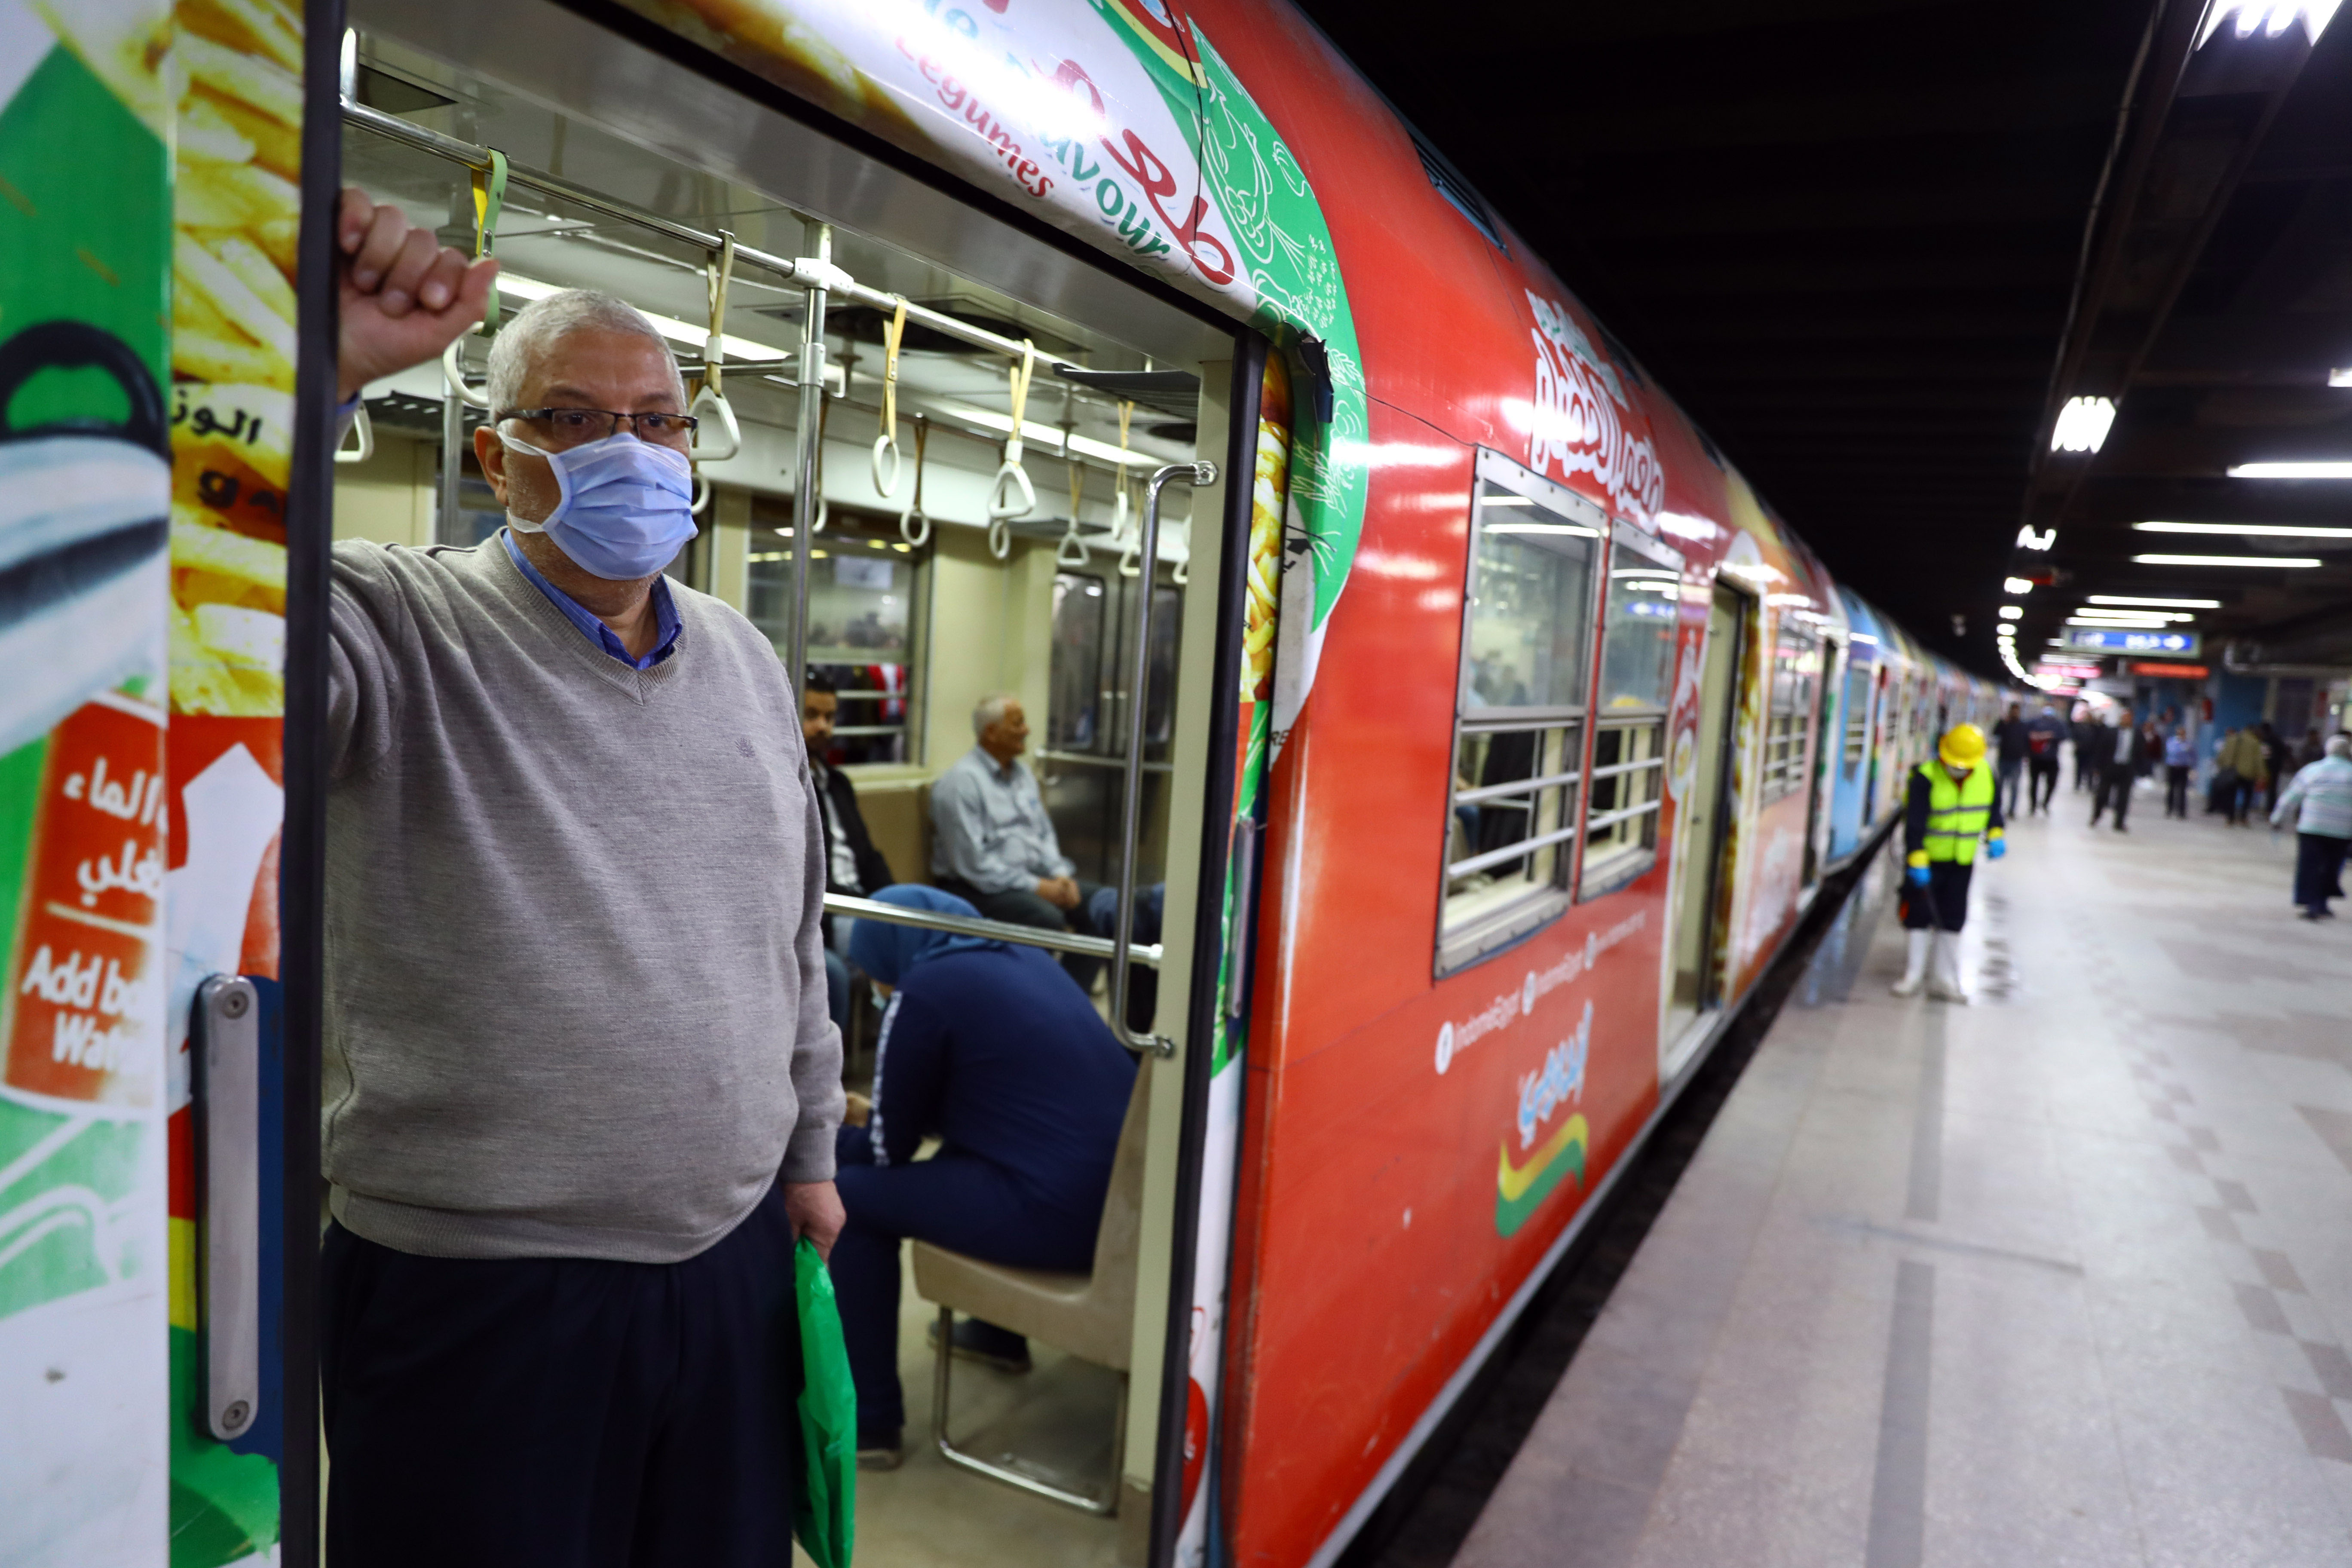 Man wearing a face mask stands in the doorway of public transportation